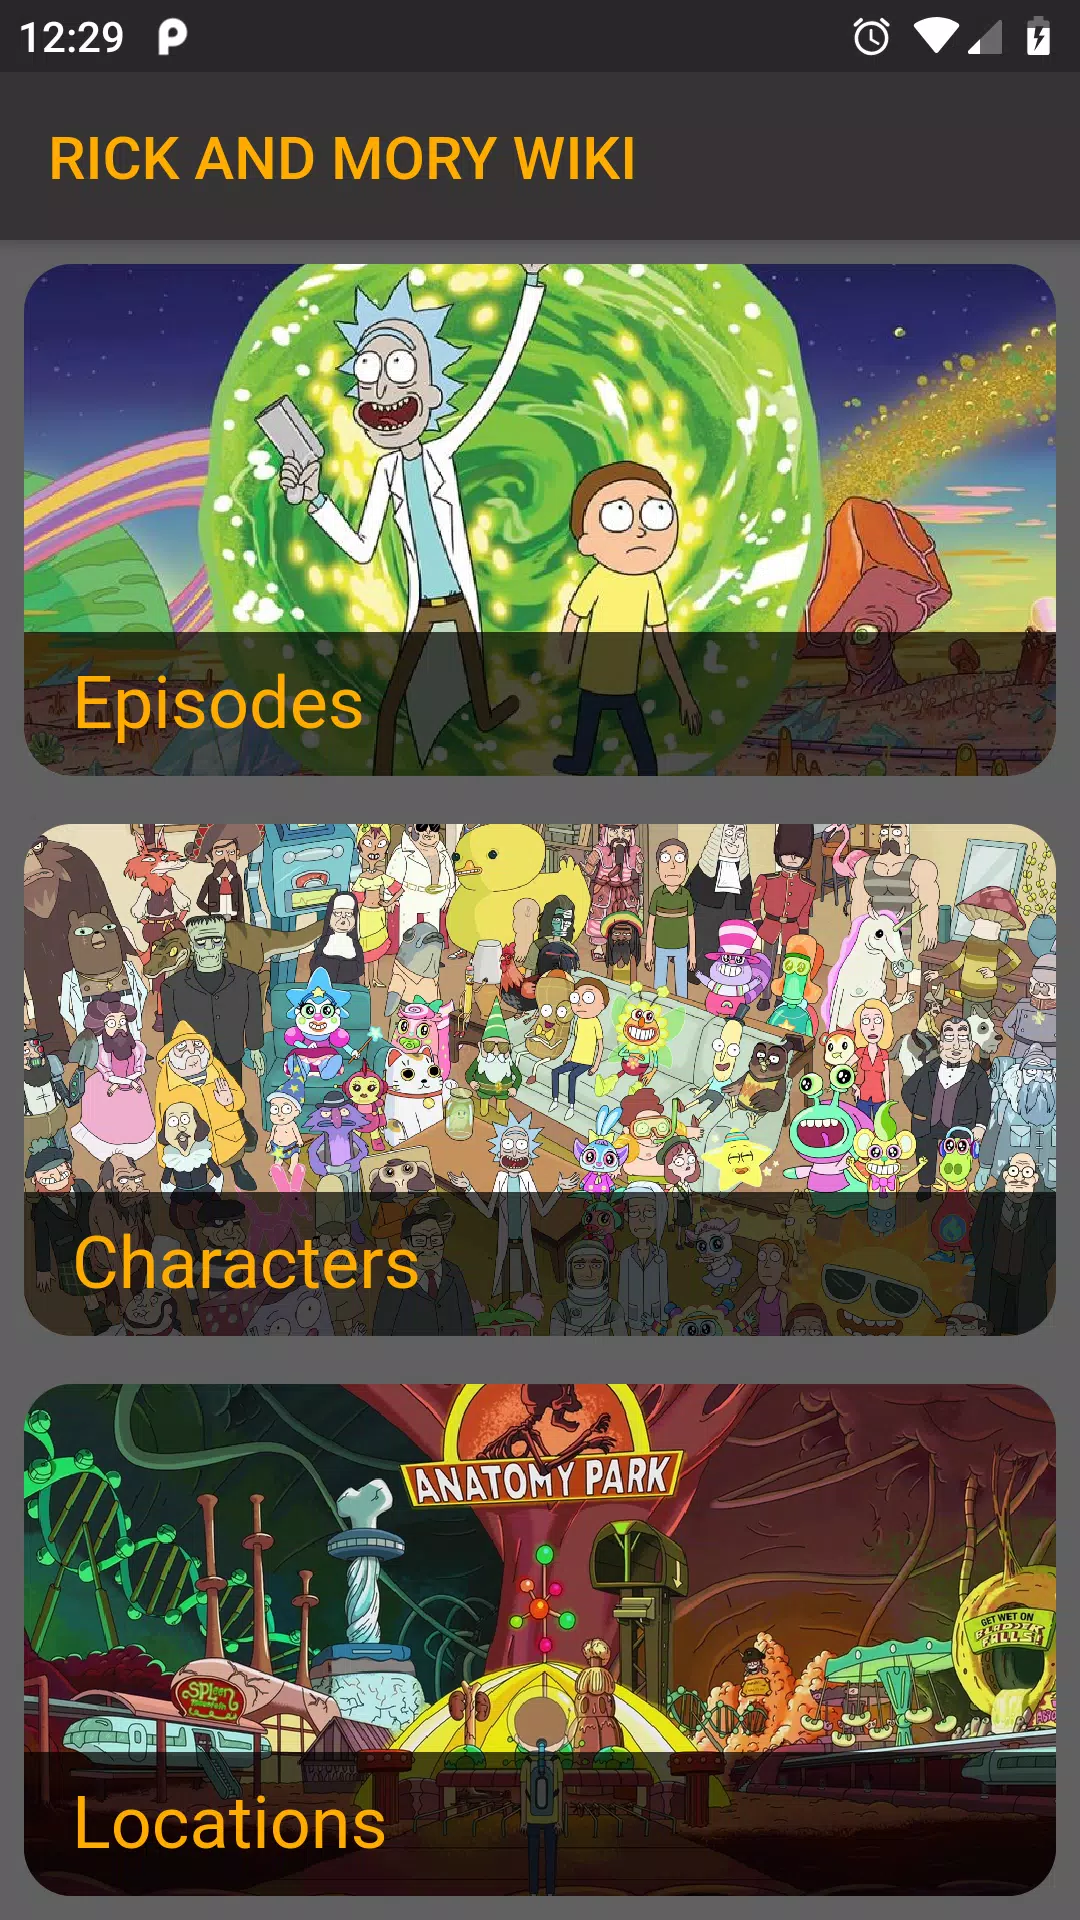 Download do APK de Rick and Morty Wiki para Android